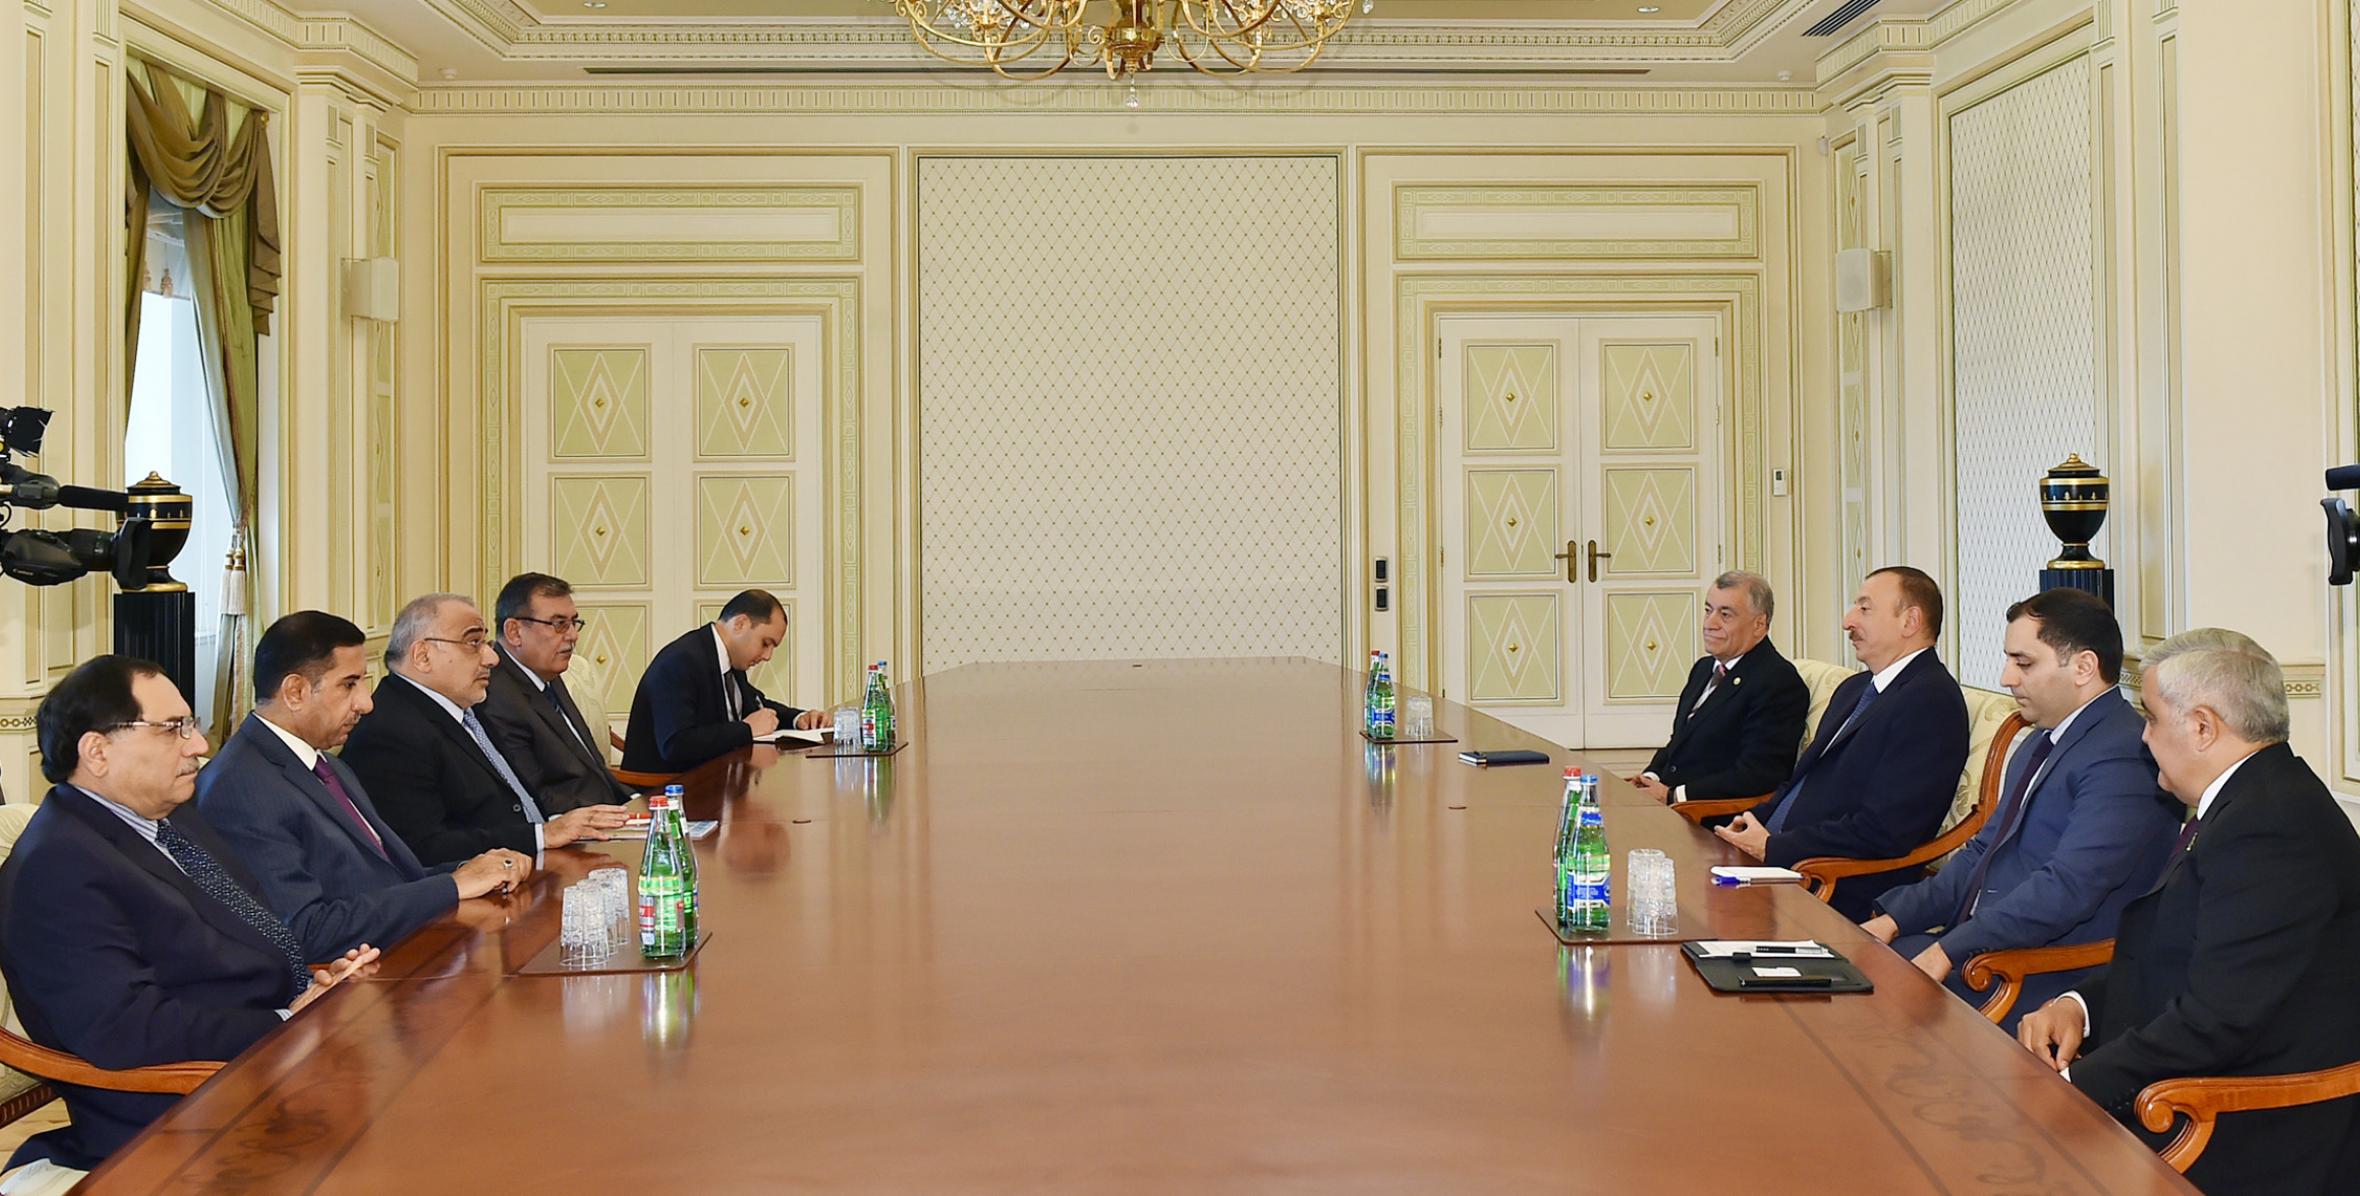 Ilham Aliyev received a delegation led by the Minister of Oil of Iraq